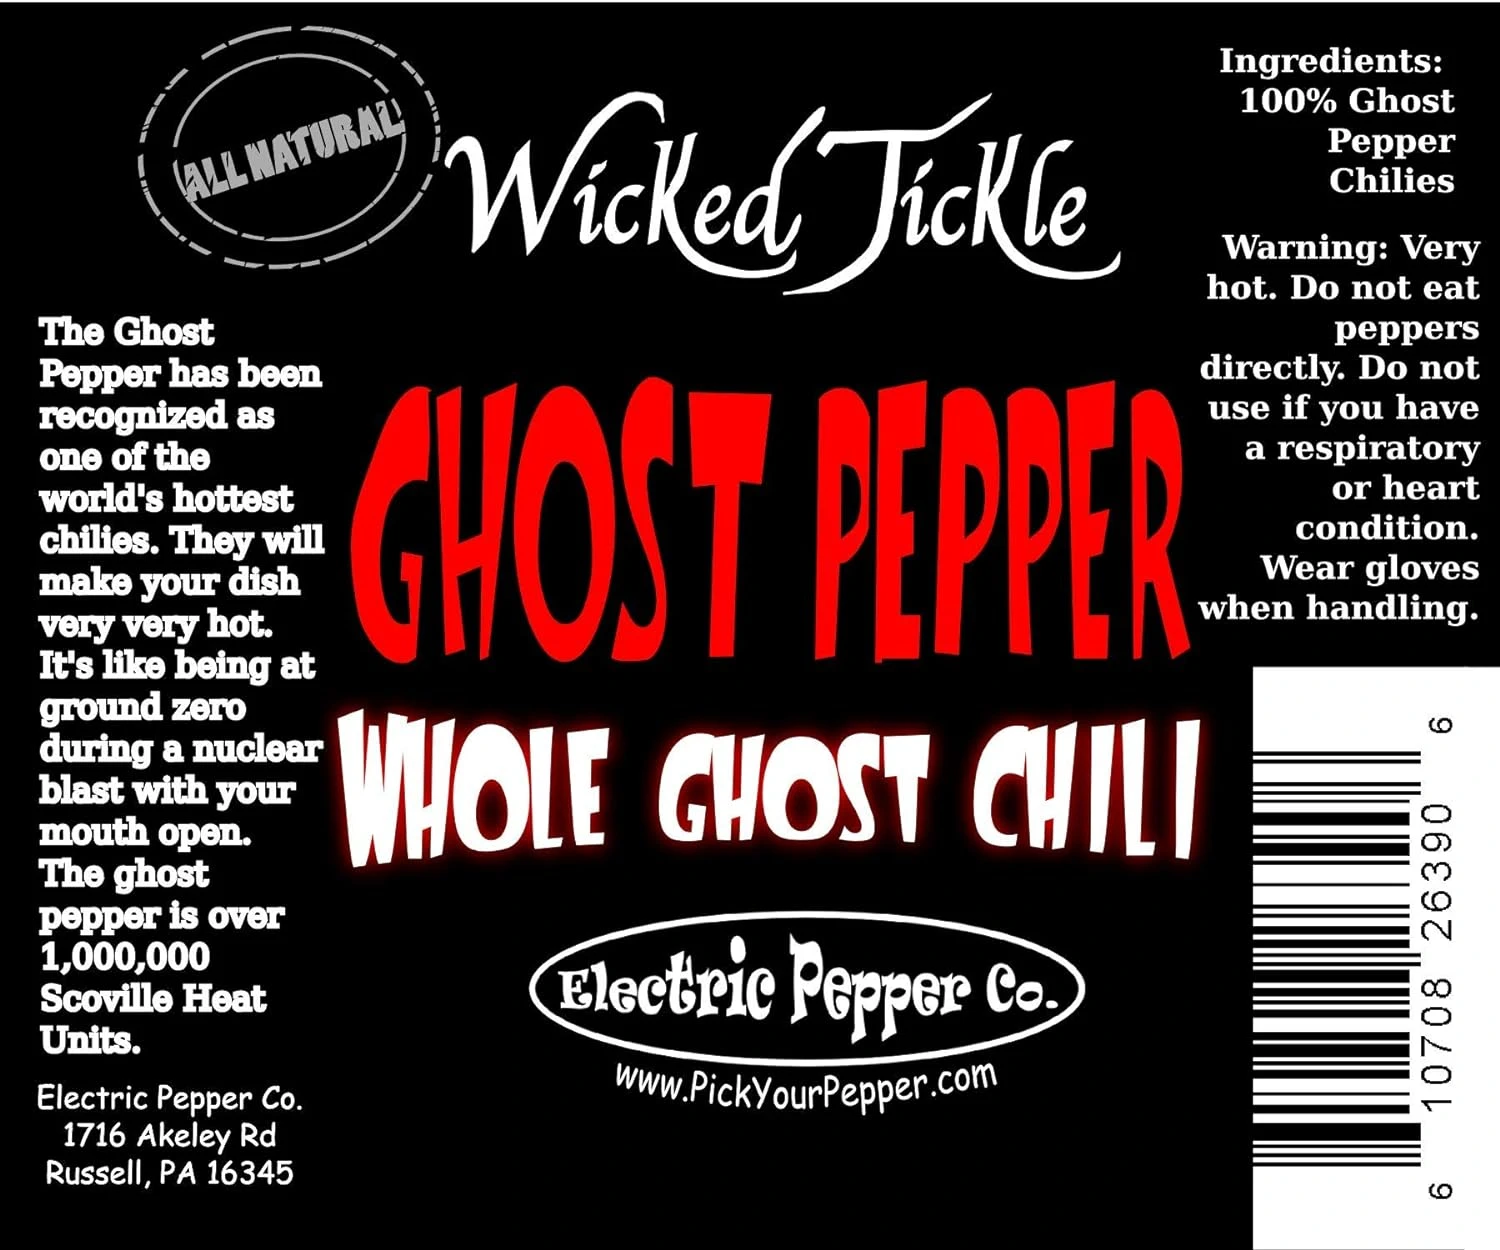 Product Label For Wicked Tickle Ghost Peppers - 
2 OZ Bag